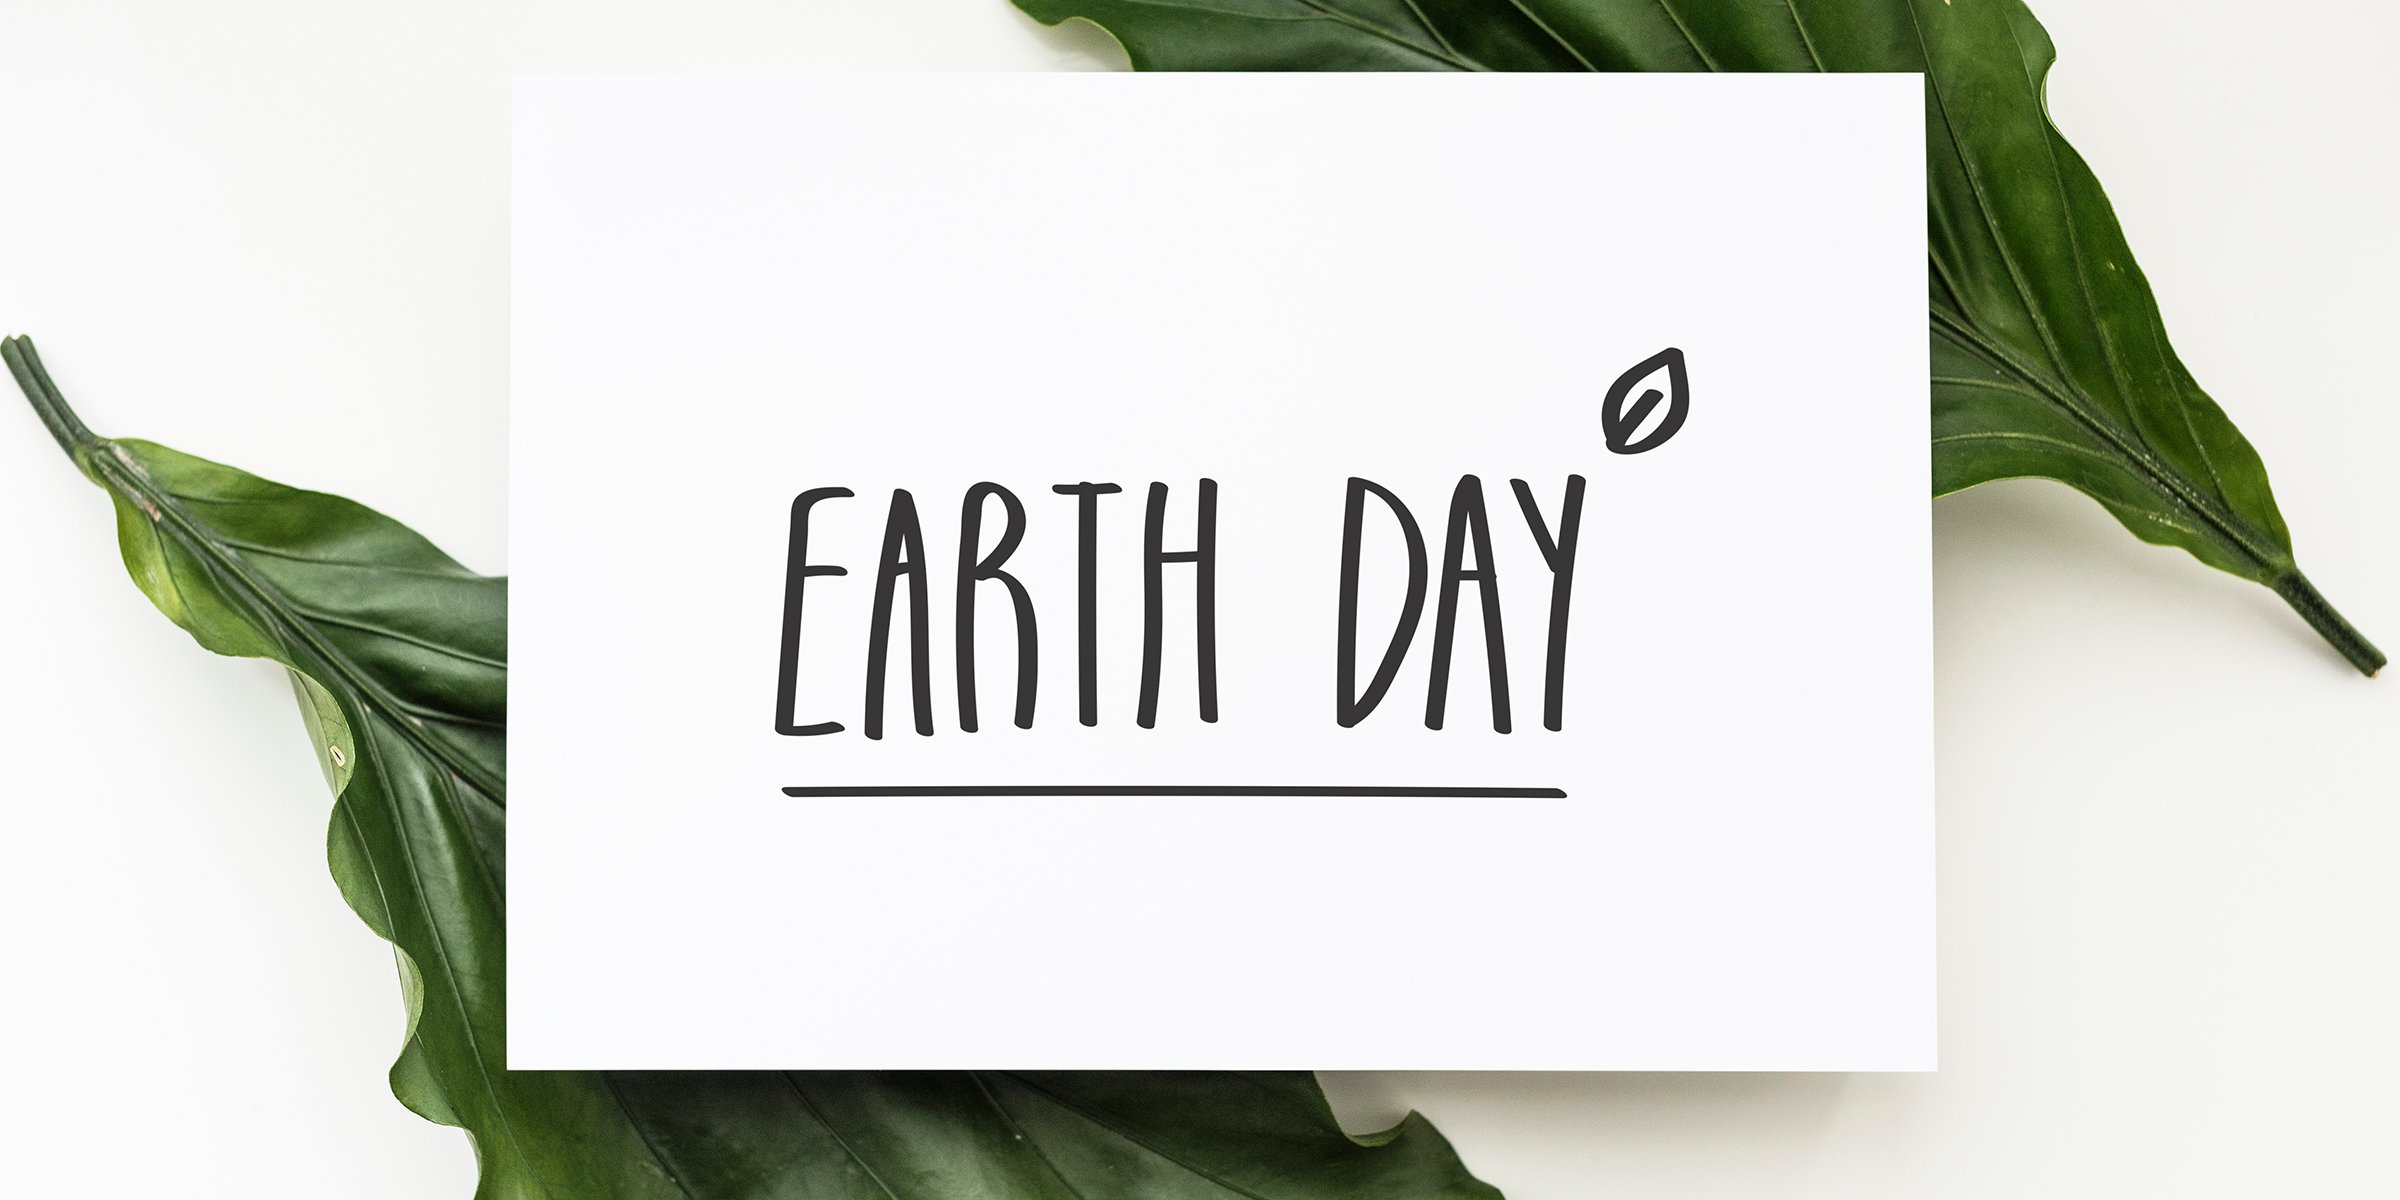 Earth Day 2020: 8 Ways to Celebrate Earth Day and Support Climate Action from Home